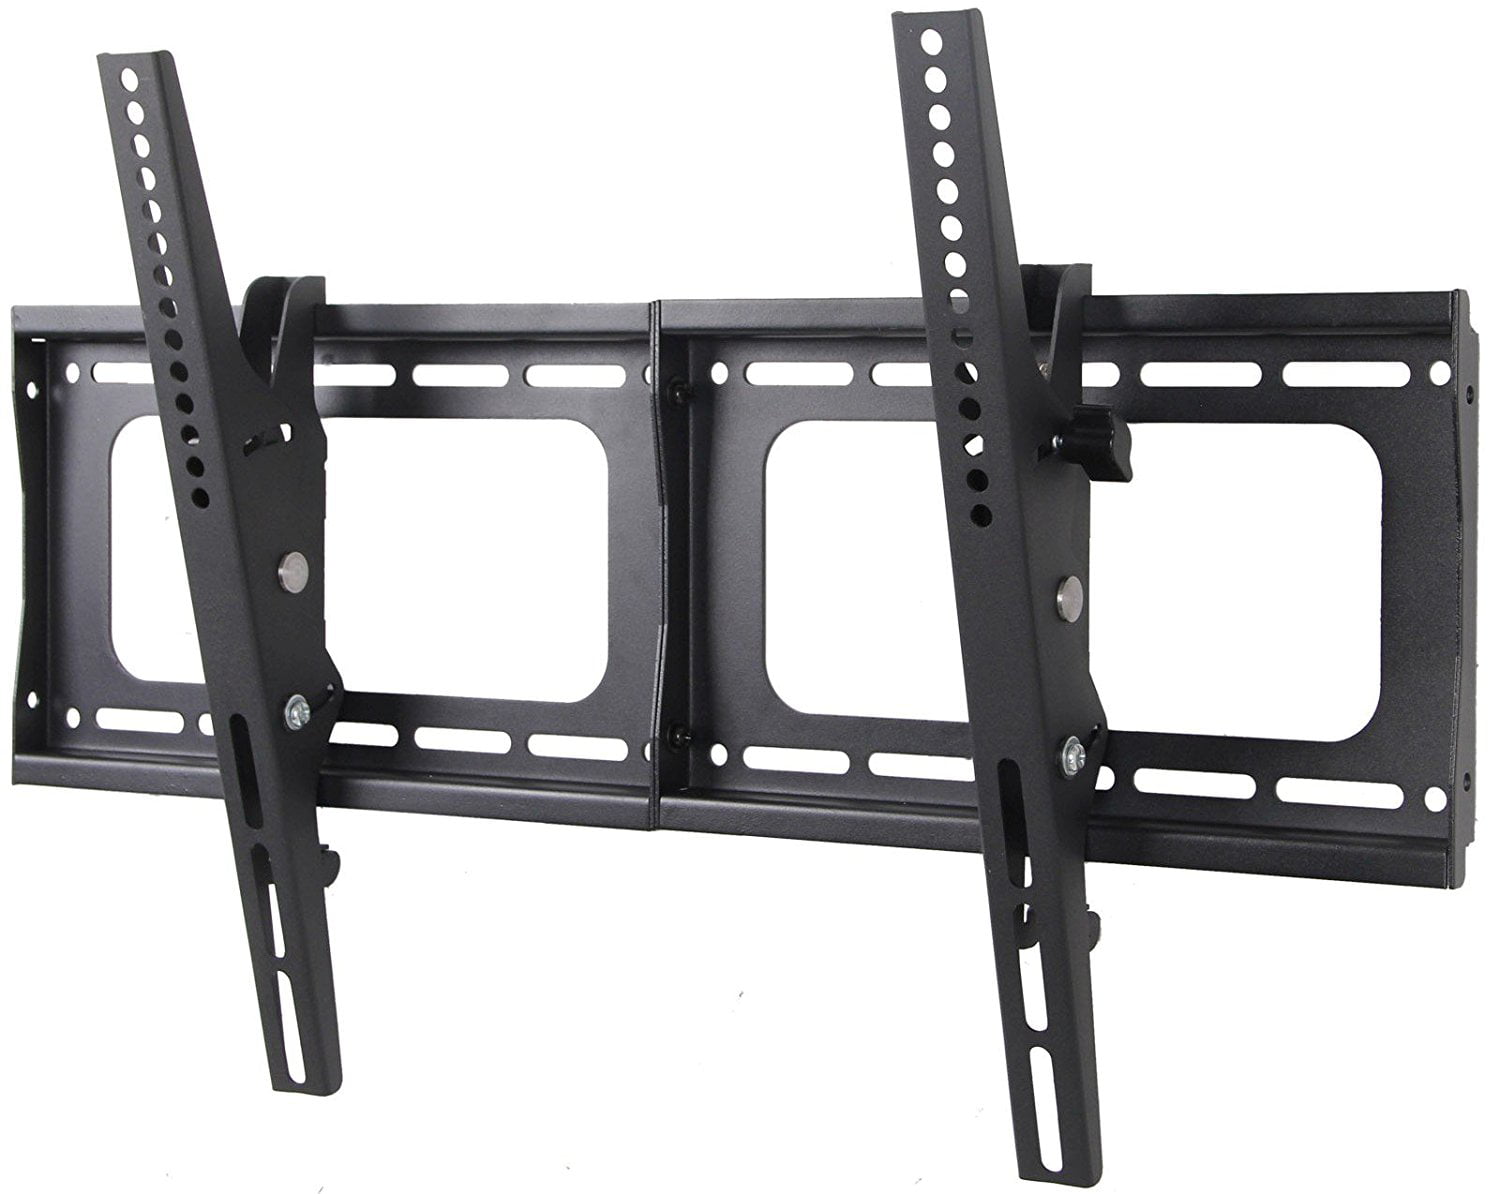 Curved HD UHD TV Wall Mount Bracket LCD ULED Articulating 40 42 50 55 60 65 70 